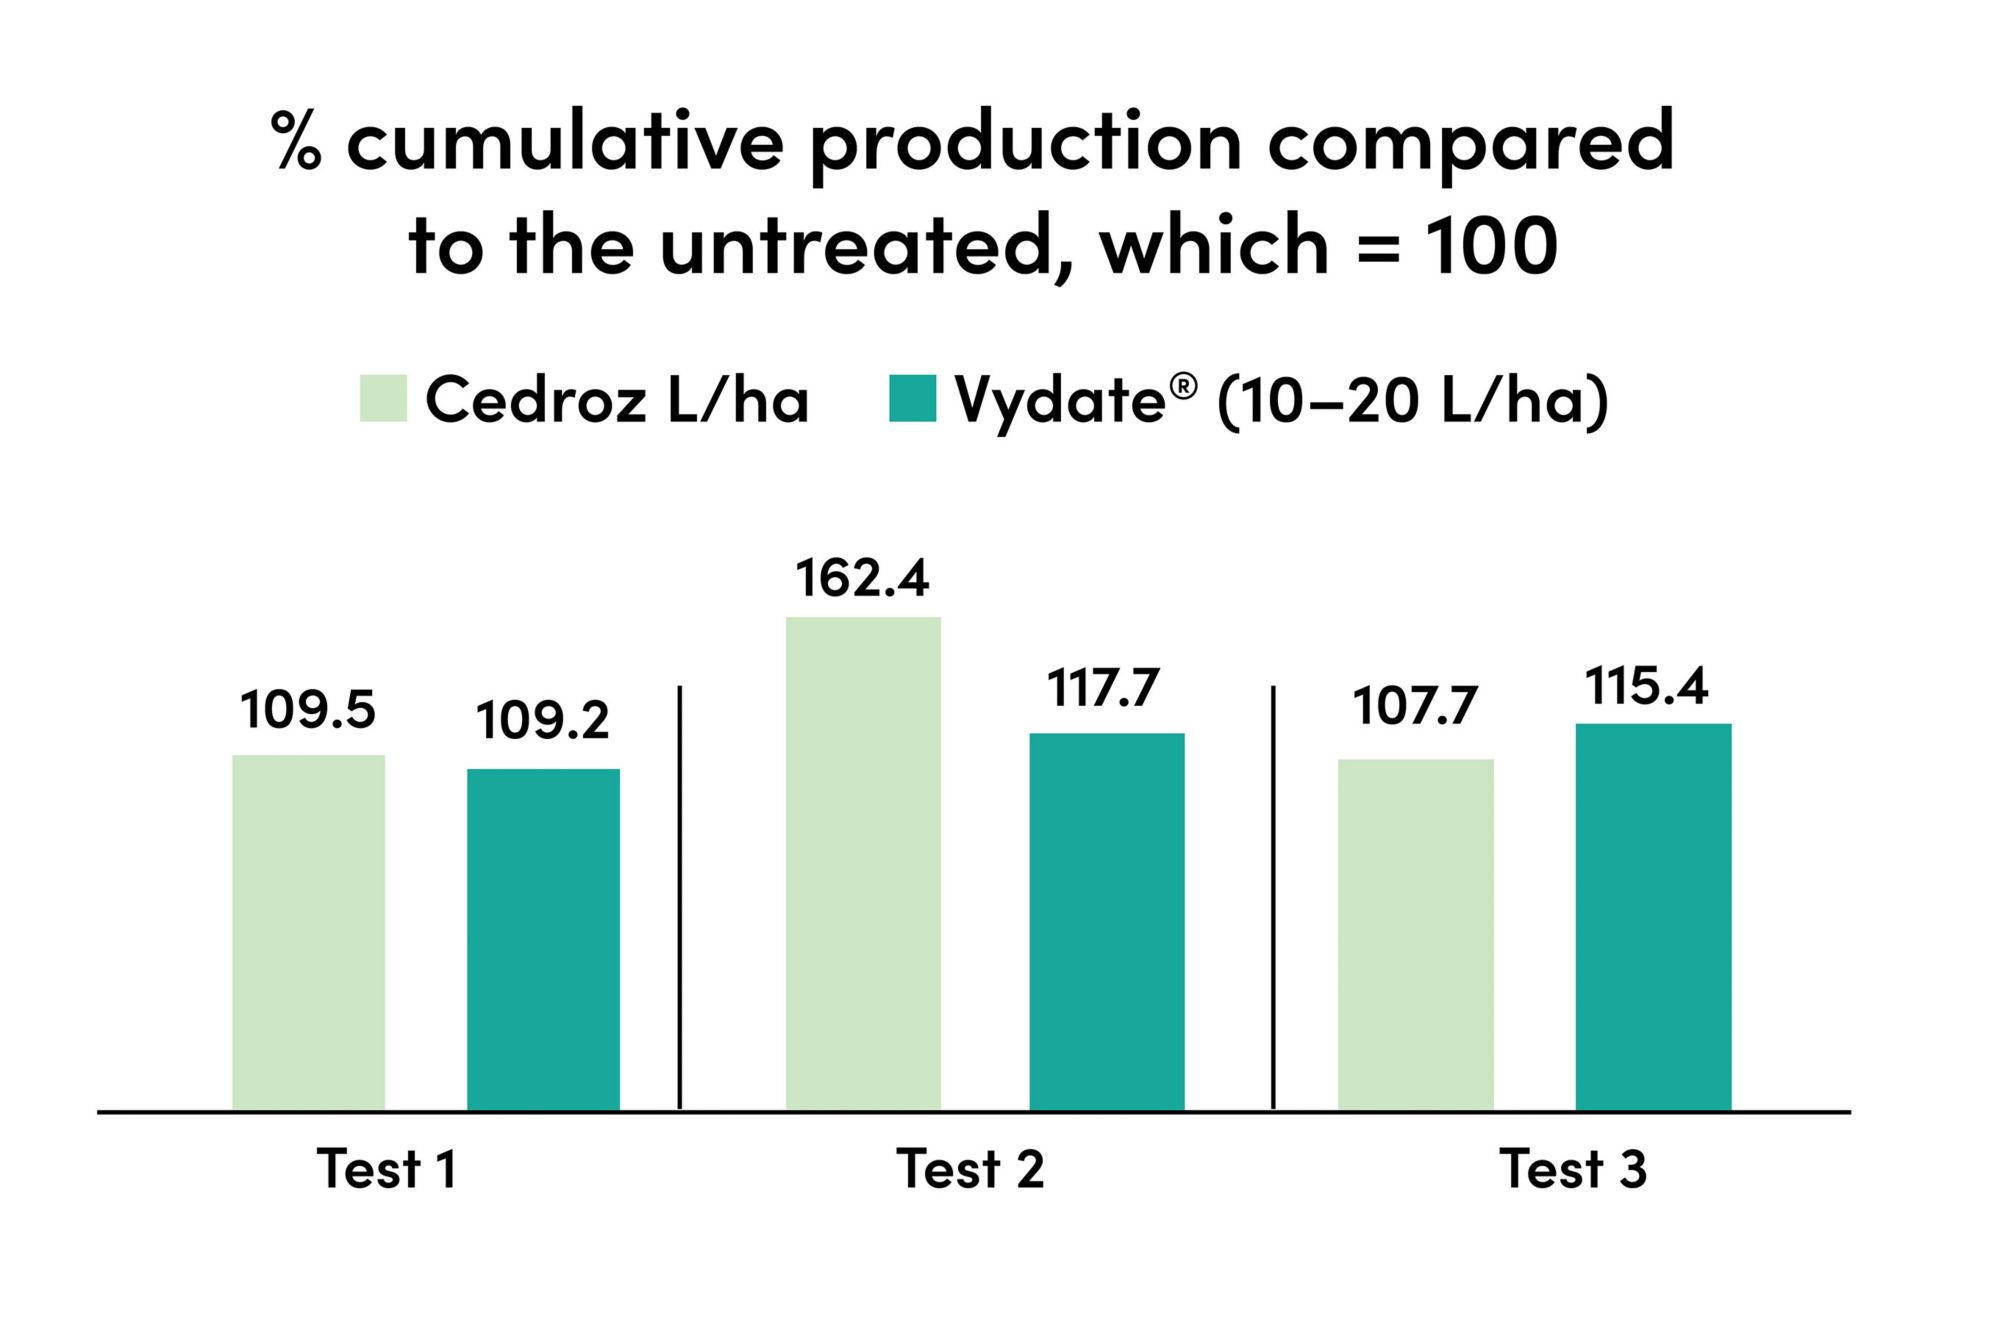 Graph compares cucumber production with standard product and Cedroz treatments, showing higher production with Cedroz 